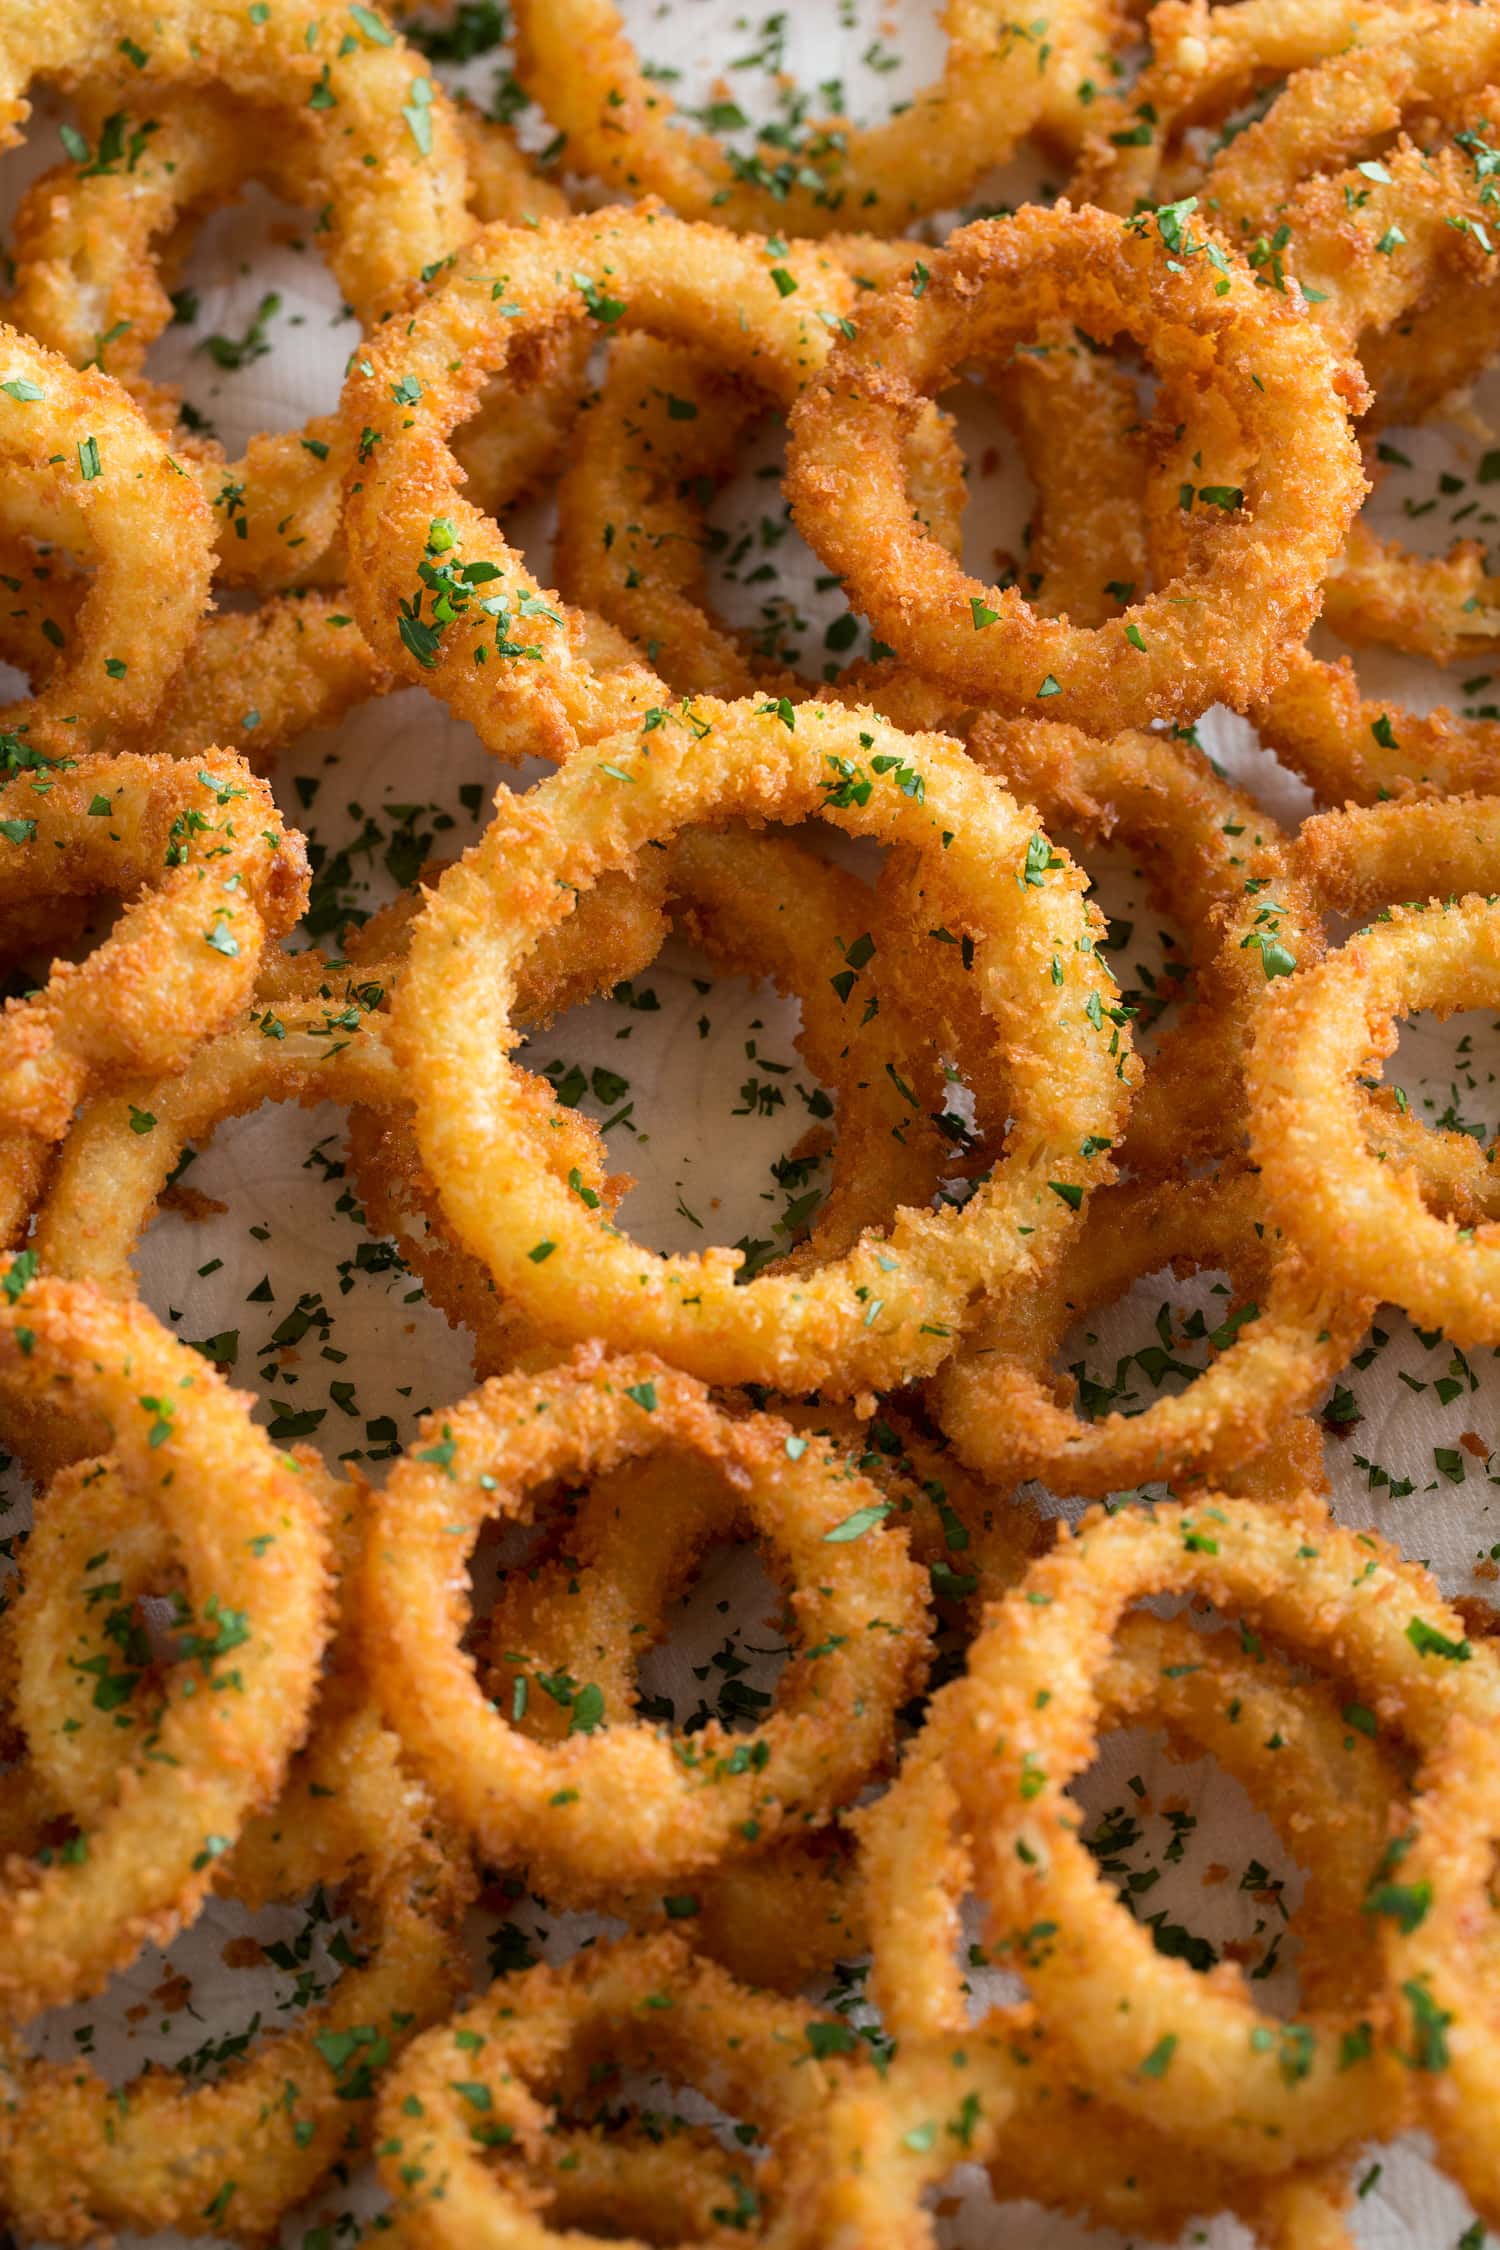 Close up photo of breaded and fried onions layered over each other and garnished with parsley.